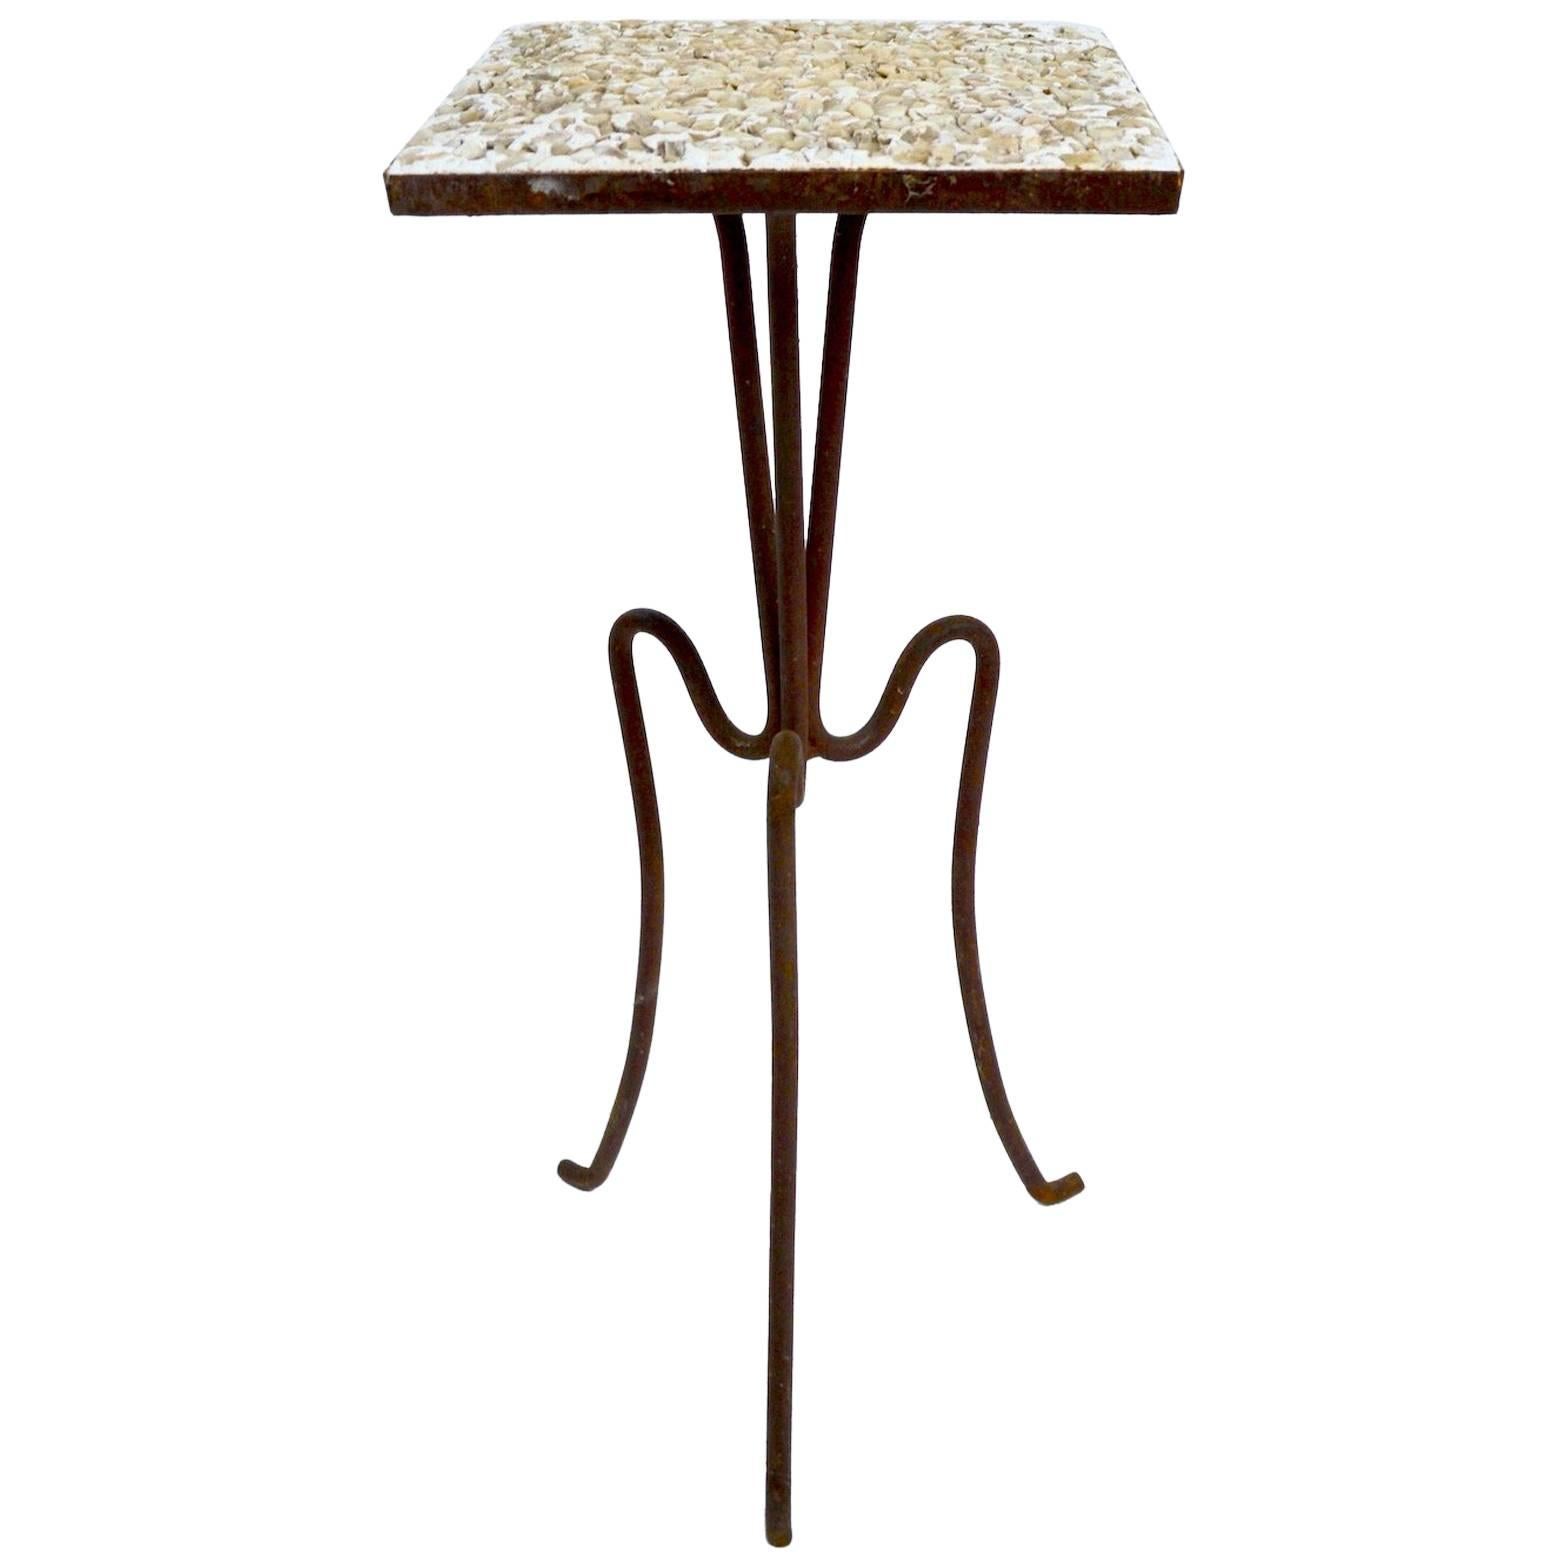 Wrought Iron and Stone Garden Patio Stand with Pebble Stone Top